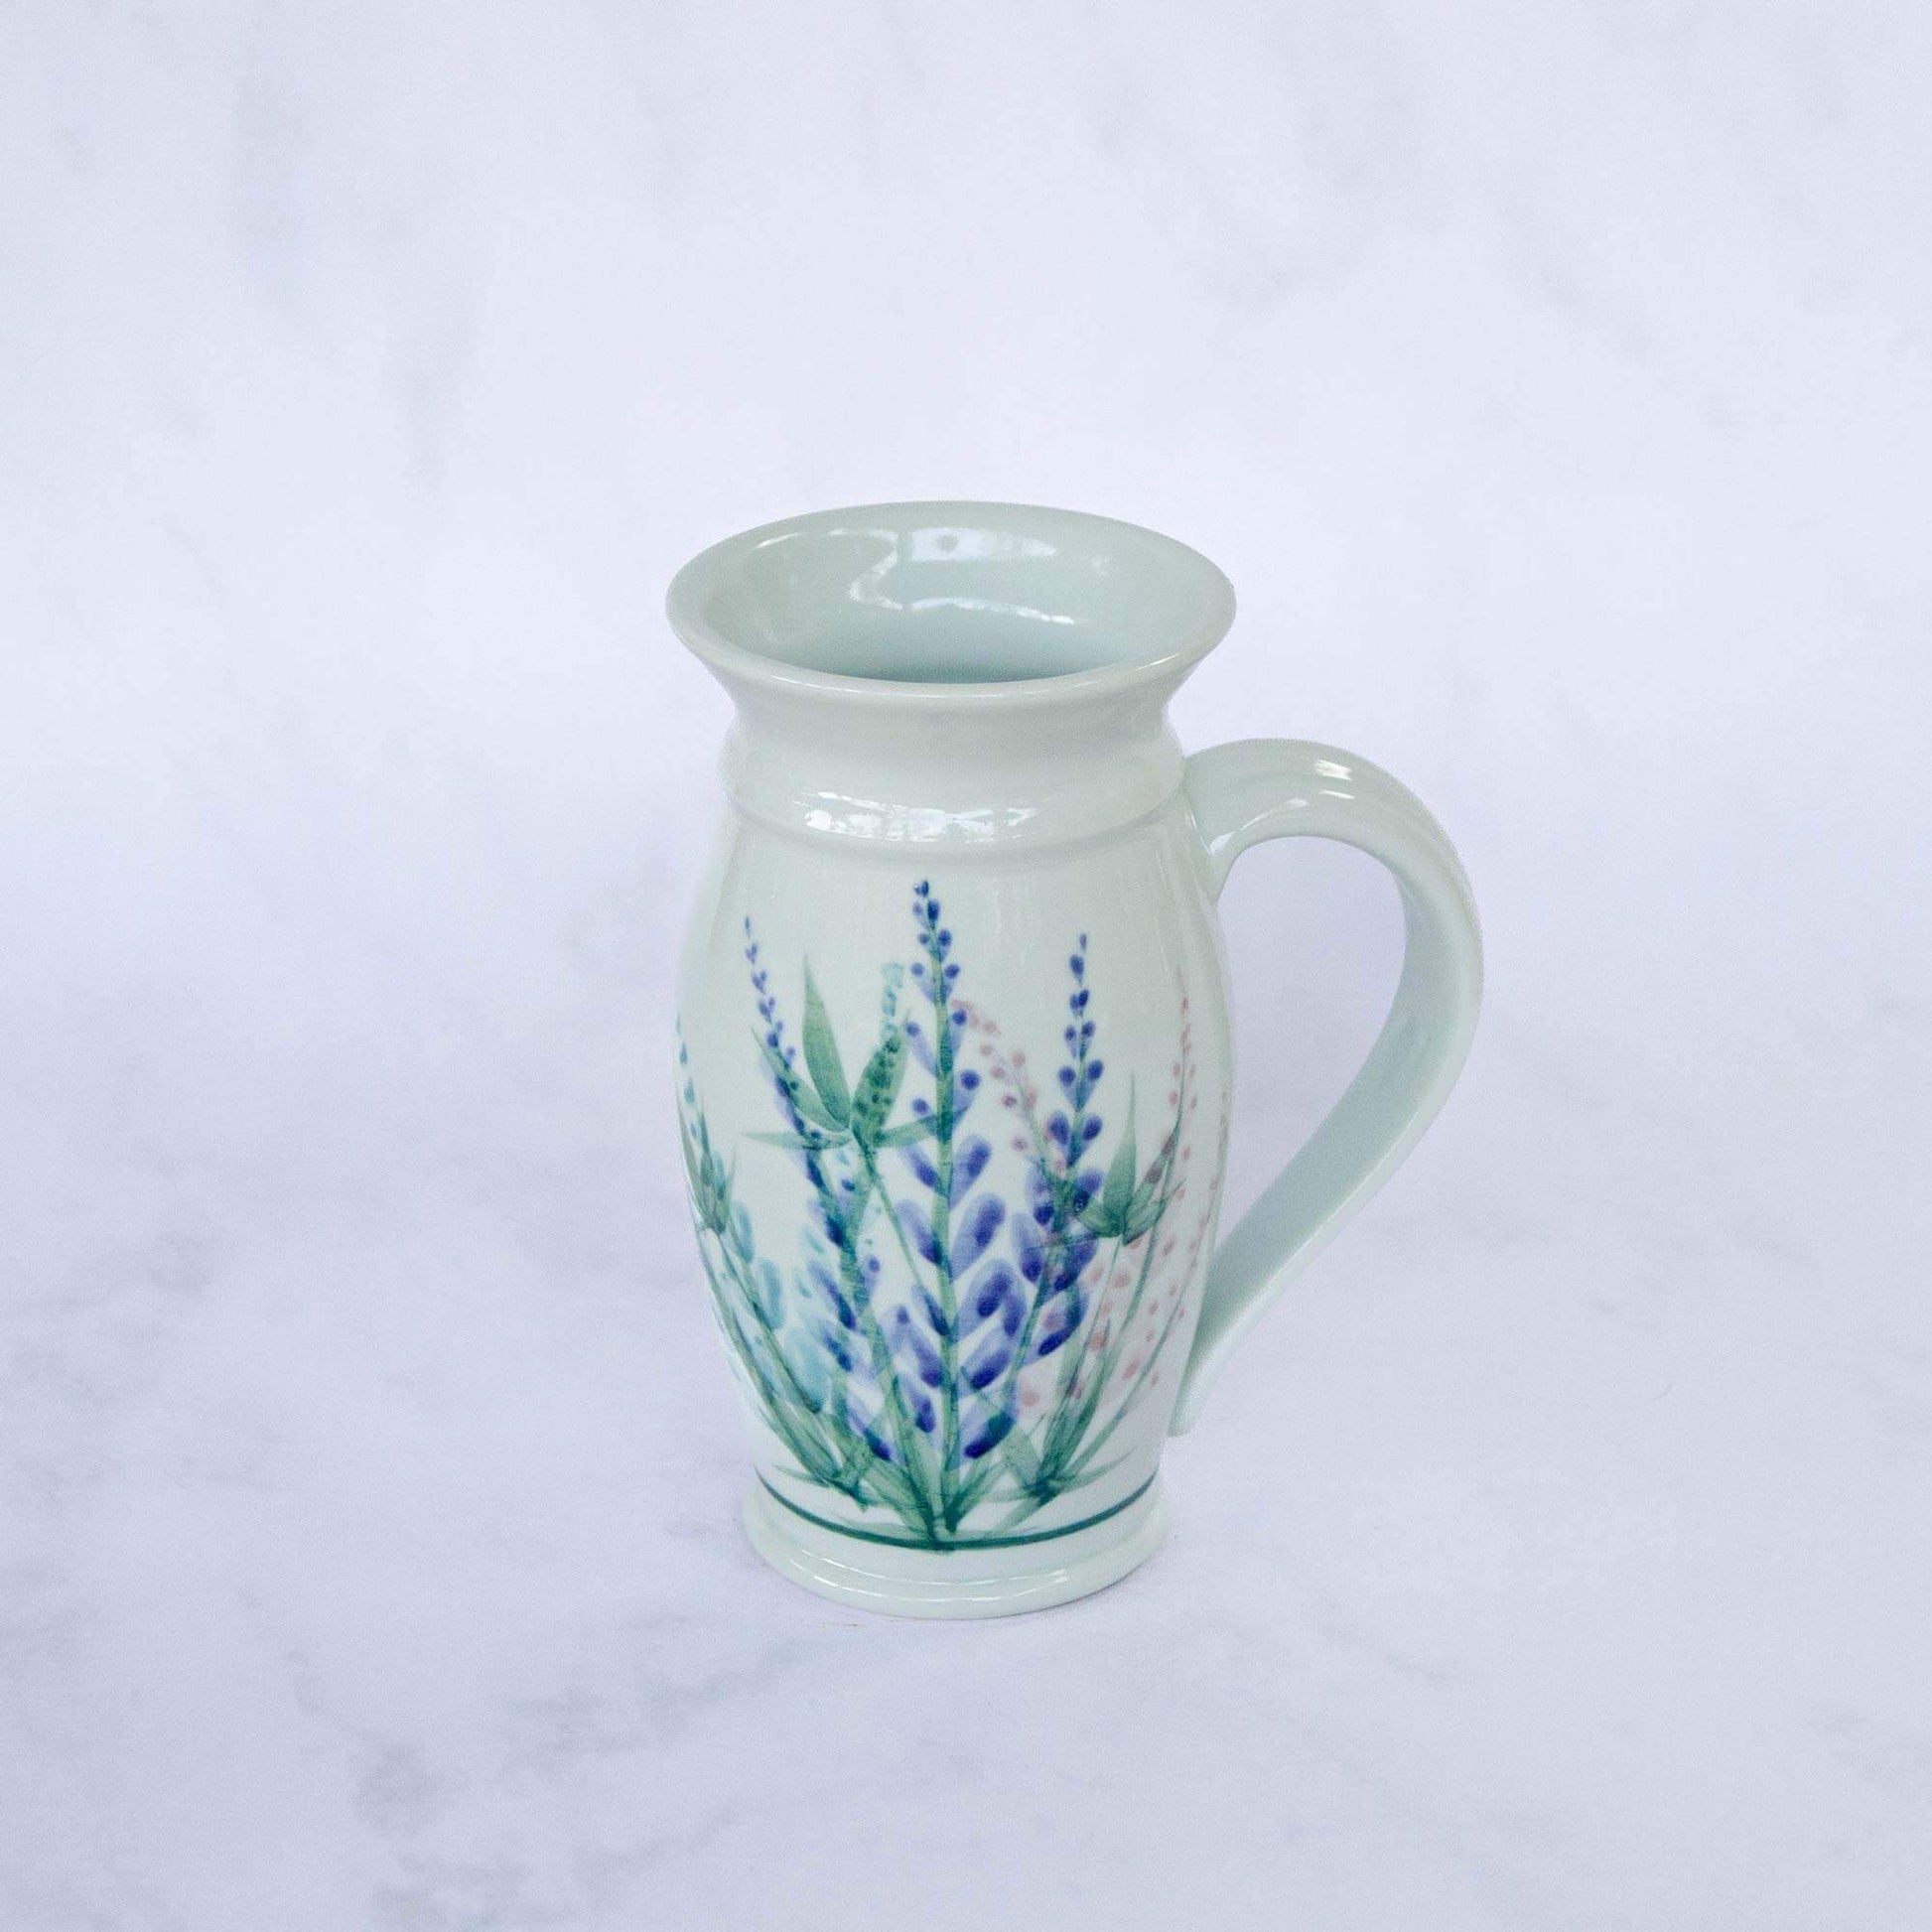 Handmade Pottery Beer Stein in Lupine pattern made by Georgetown Pottery in Maine